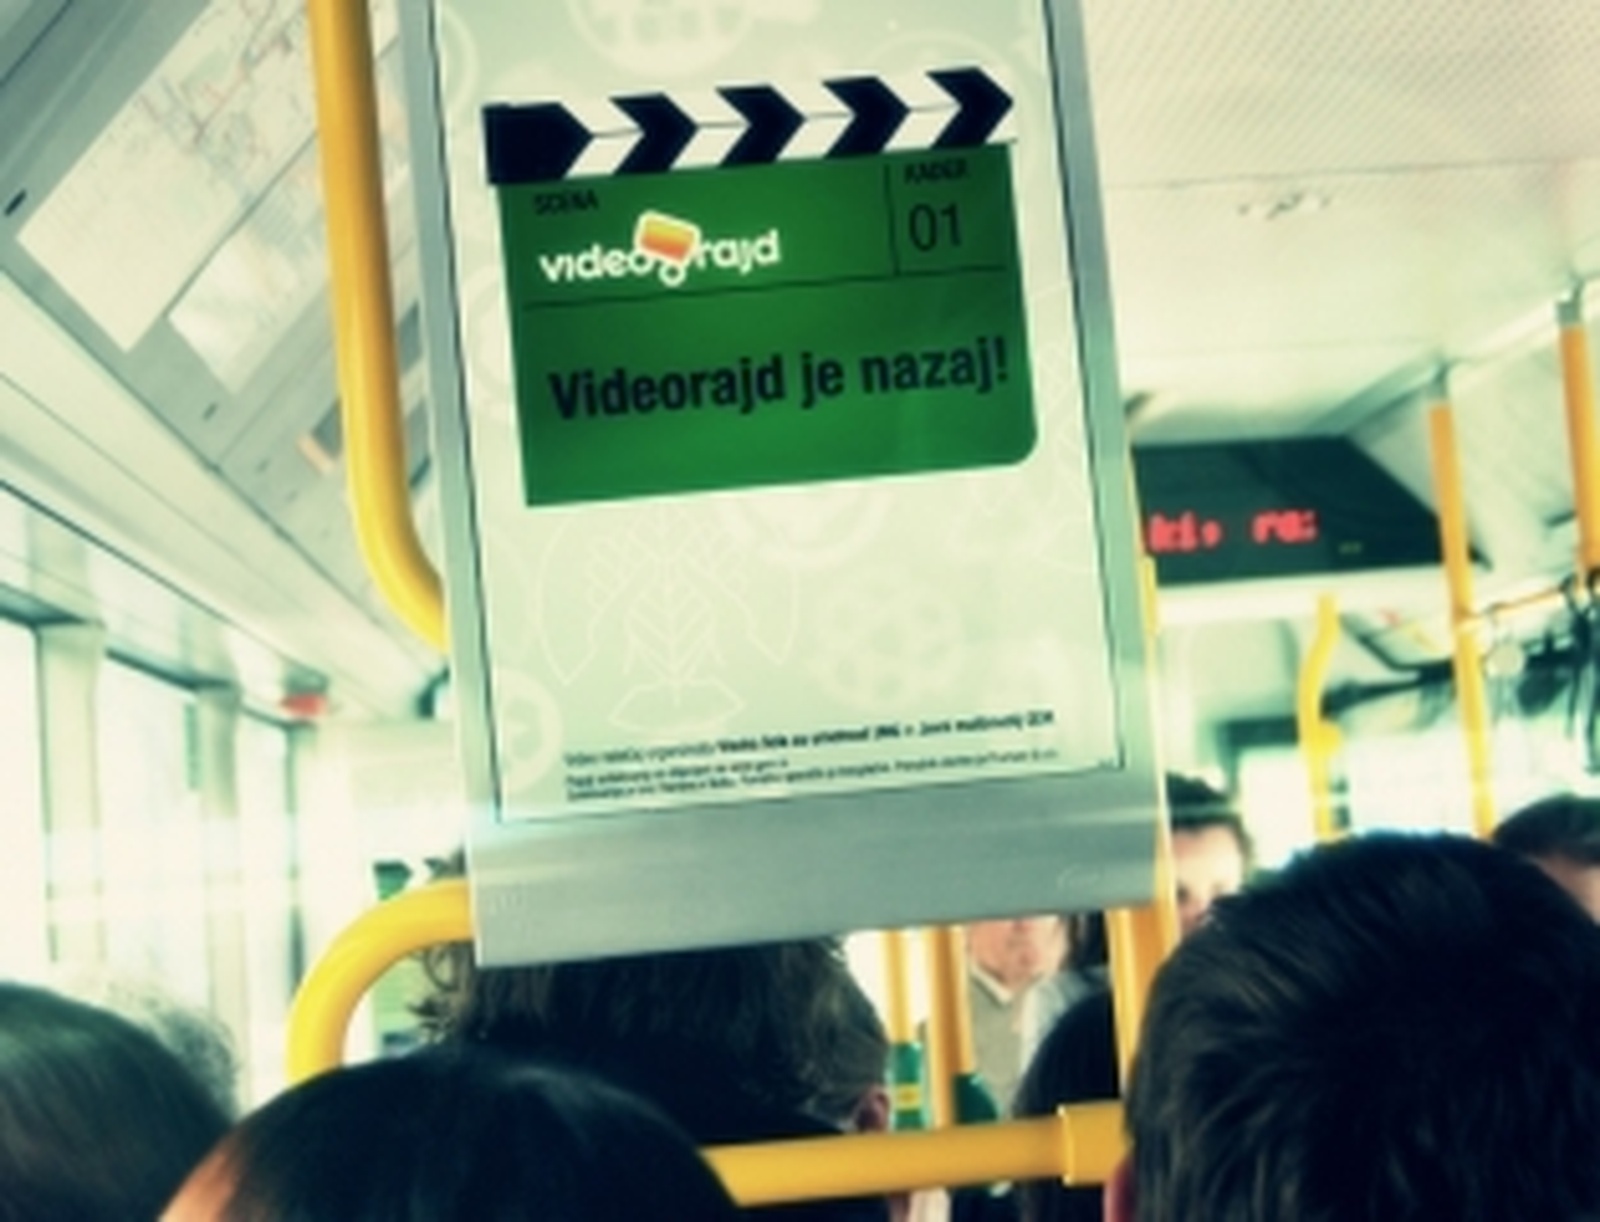 2nd VideoRajd Competition Call for Applications - Video competition for the web and Ljubljana bus screens